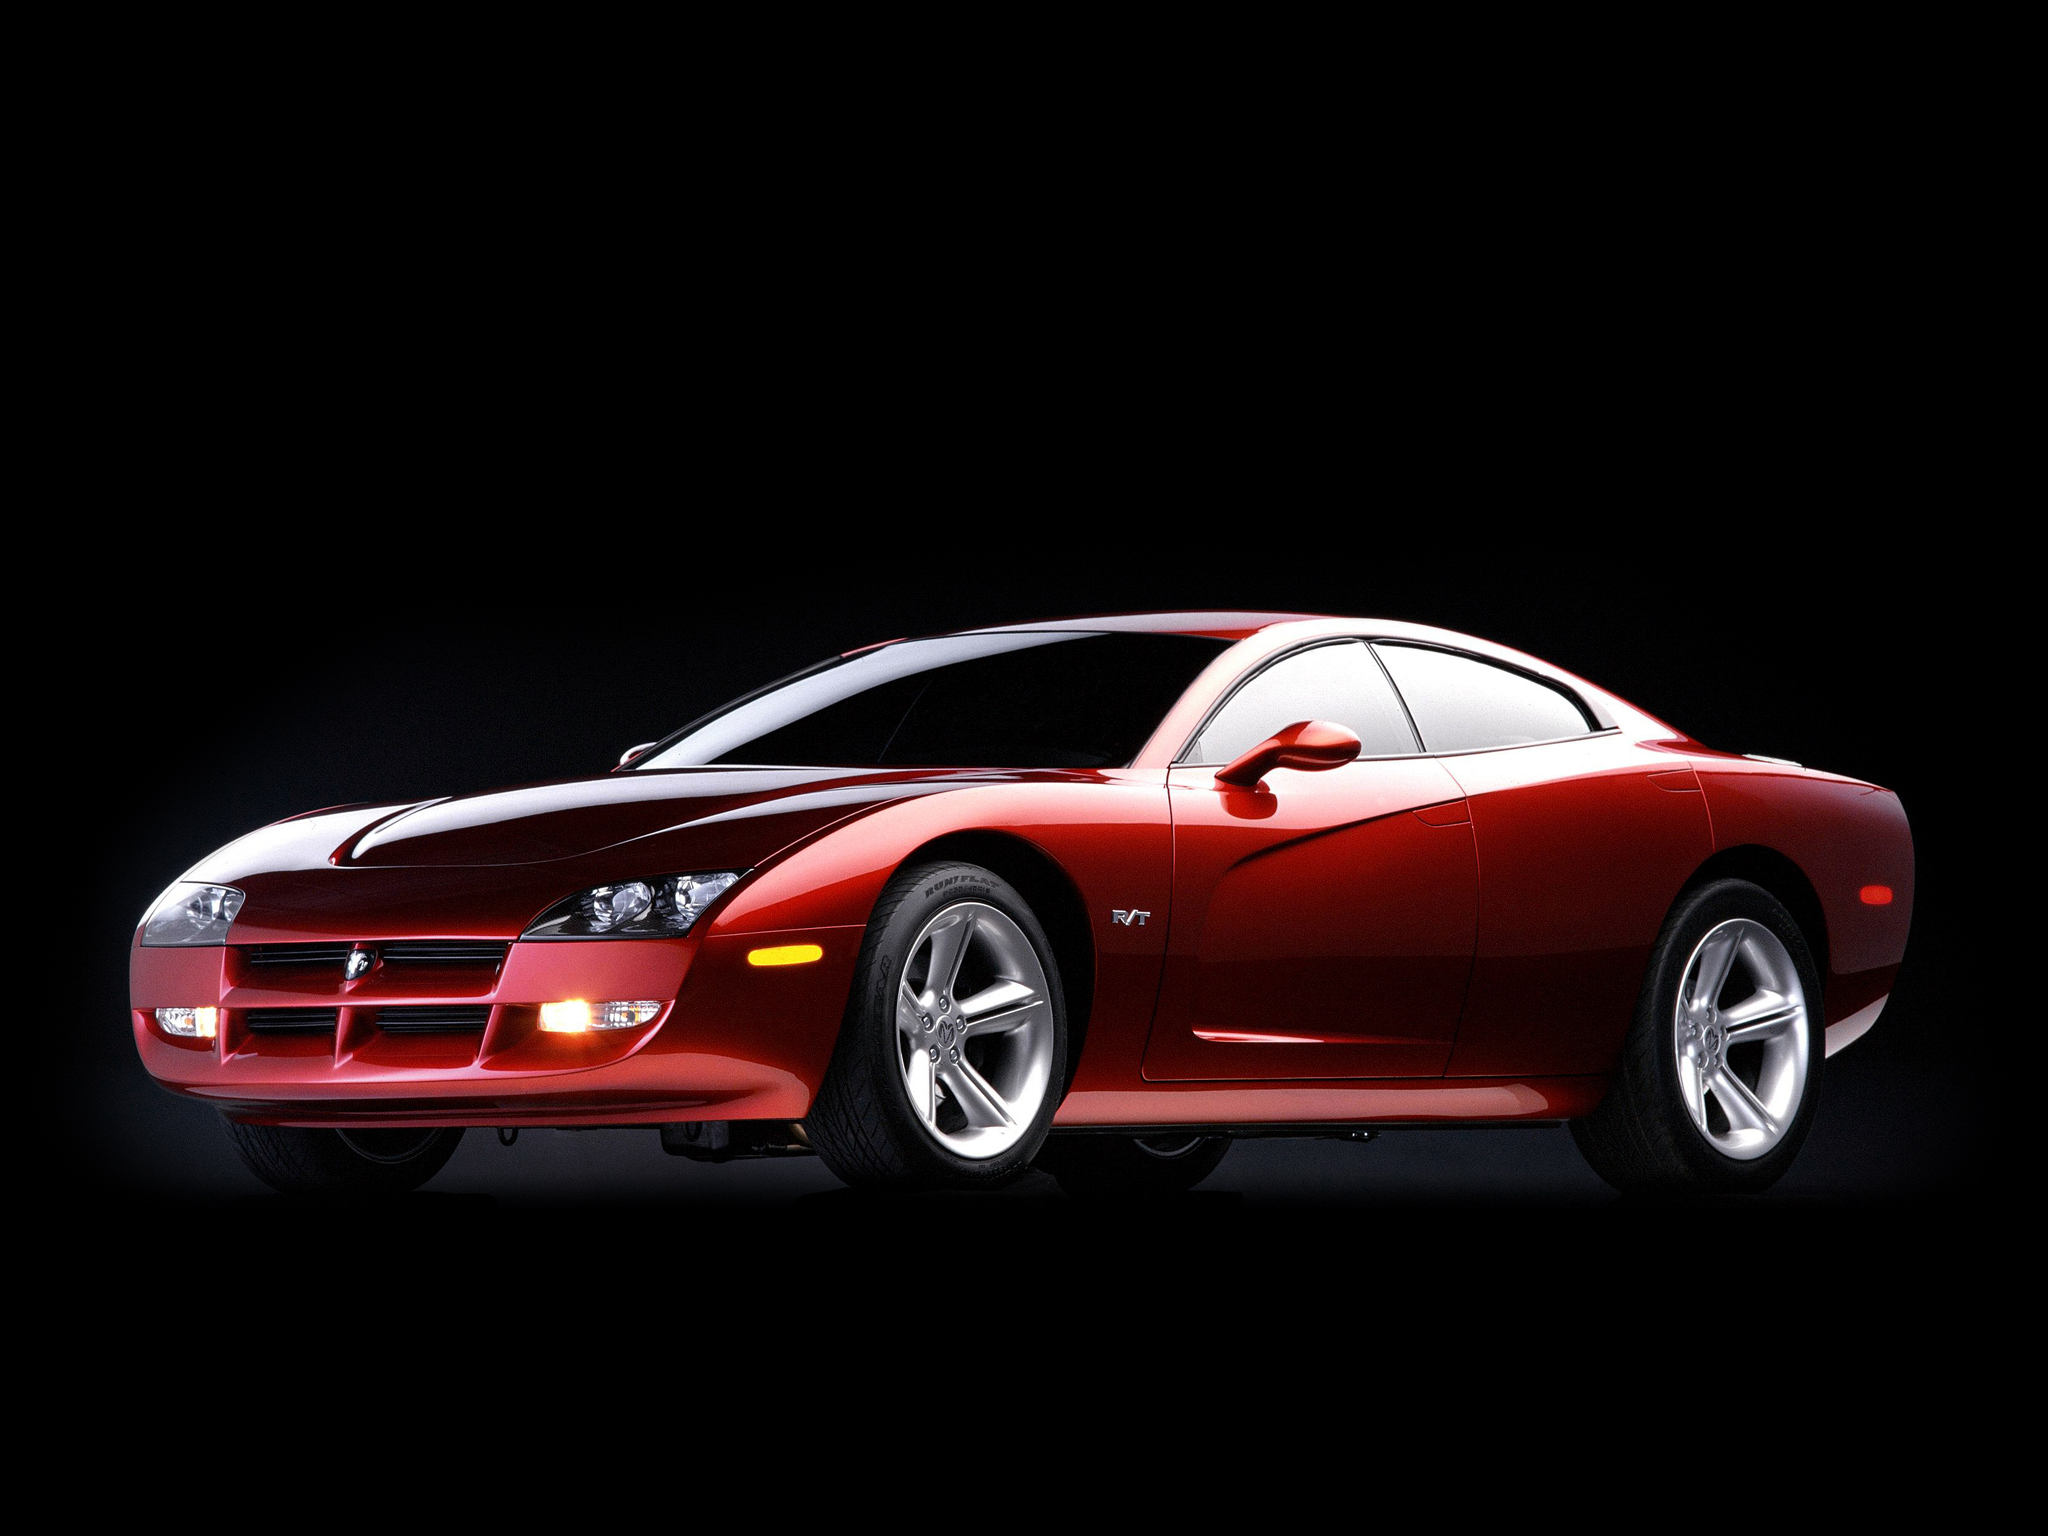 1999, Dodge, Charger, R t, Concept, Muscle, Supercar, Fs Wallpaper